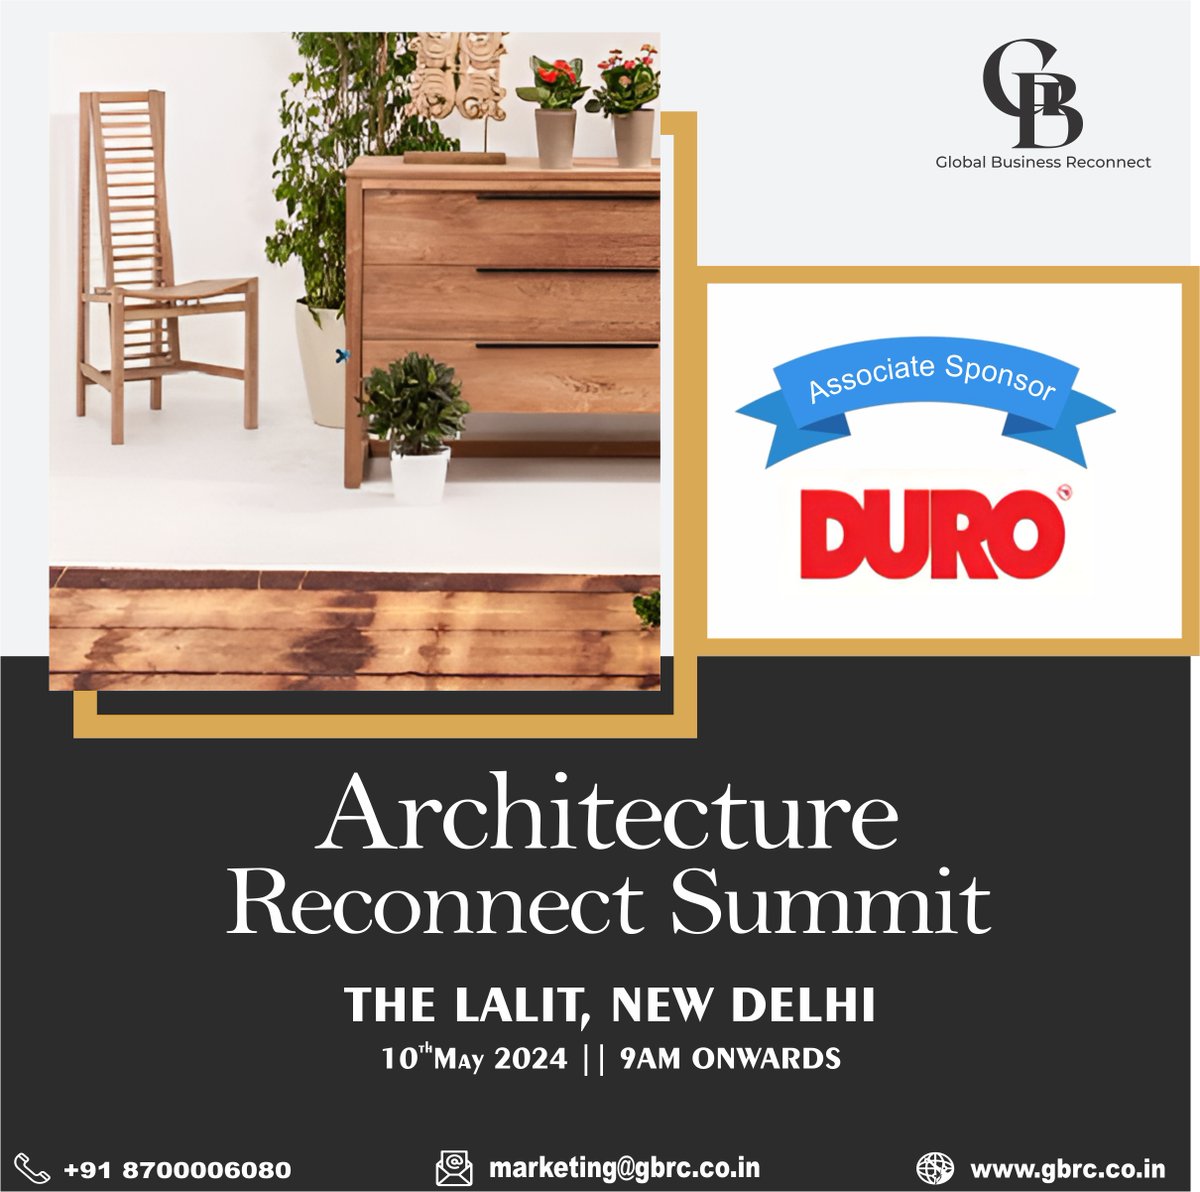 We're absolutely delighted to welcome @Duroply onboard as our Associate Sponsor for the Architecture Reconnect Summit which is going to happen on 10th May, 2024 at The Lalit, New Delhi!
Together, we're poised to create unforgettable experiences

#architecturereconnectsummit #GBRC